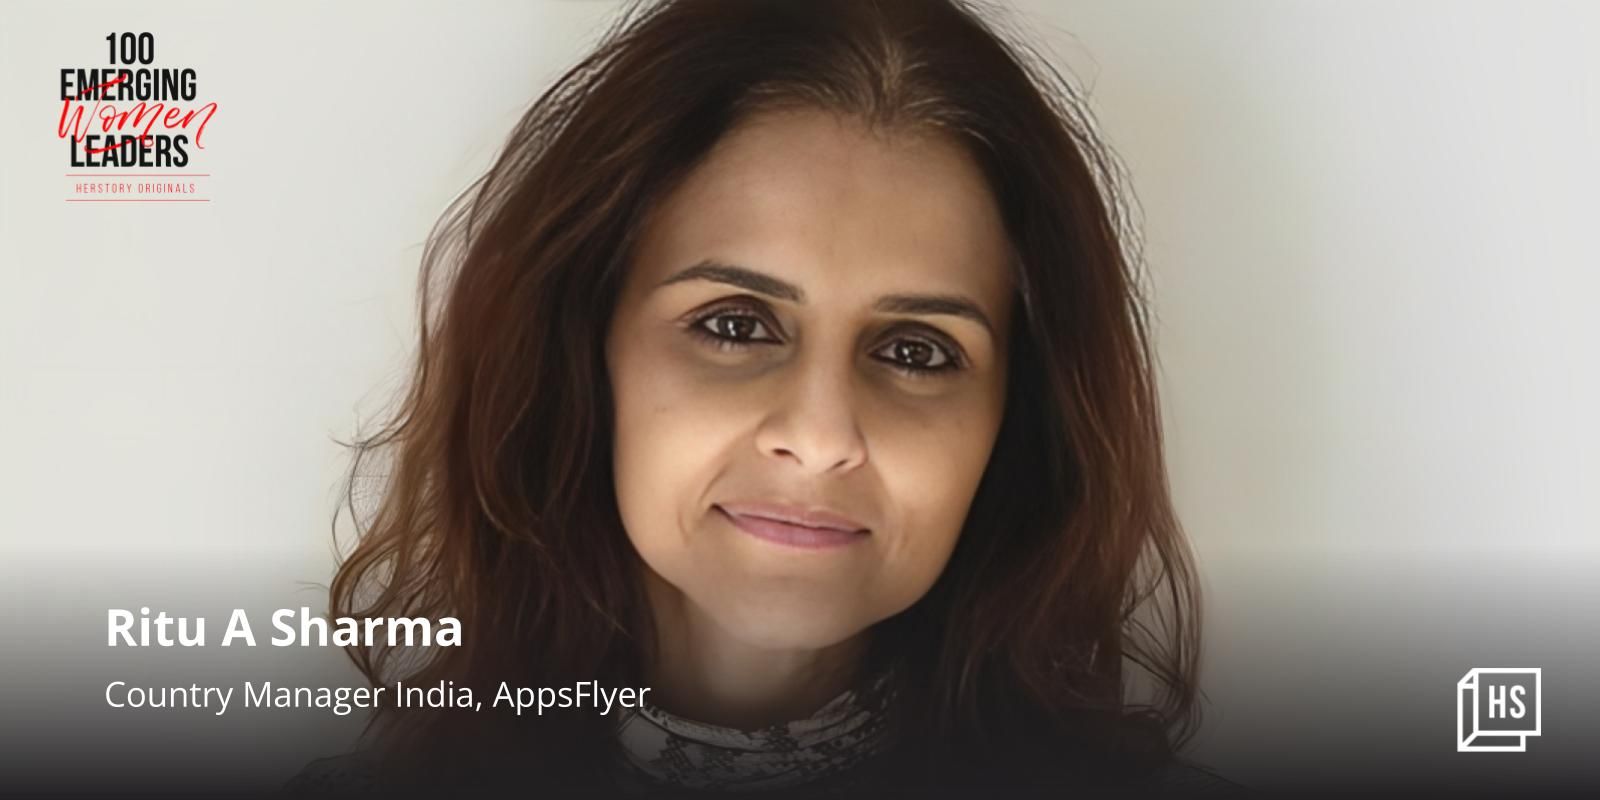 [100 Emerging Women Leaders] Defying odds stacked against her, Ritu A Sharma’s journey to leadership
